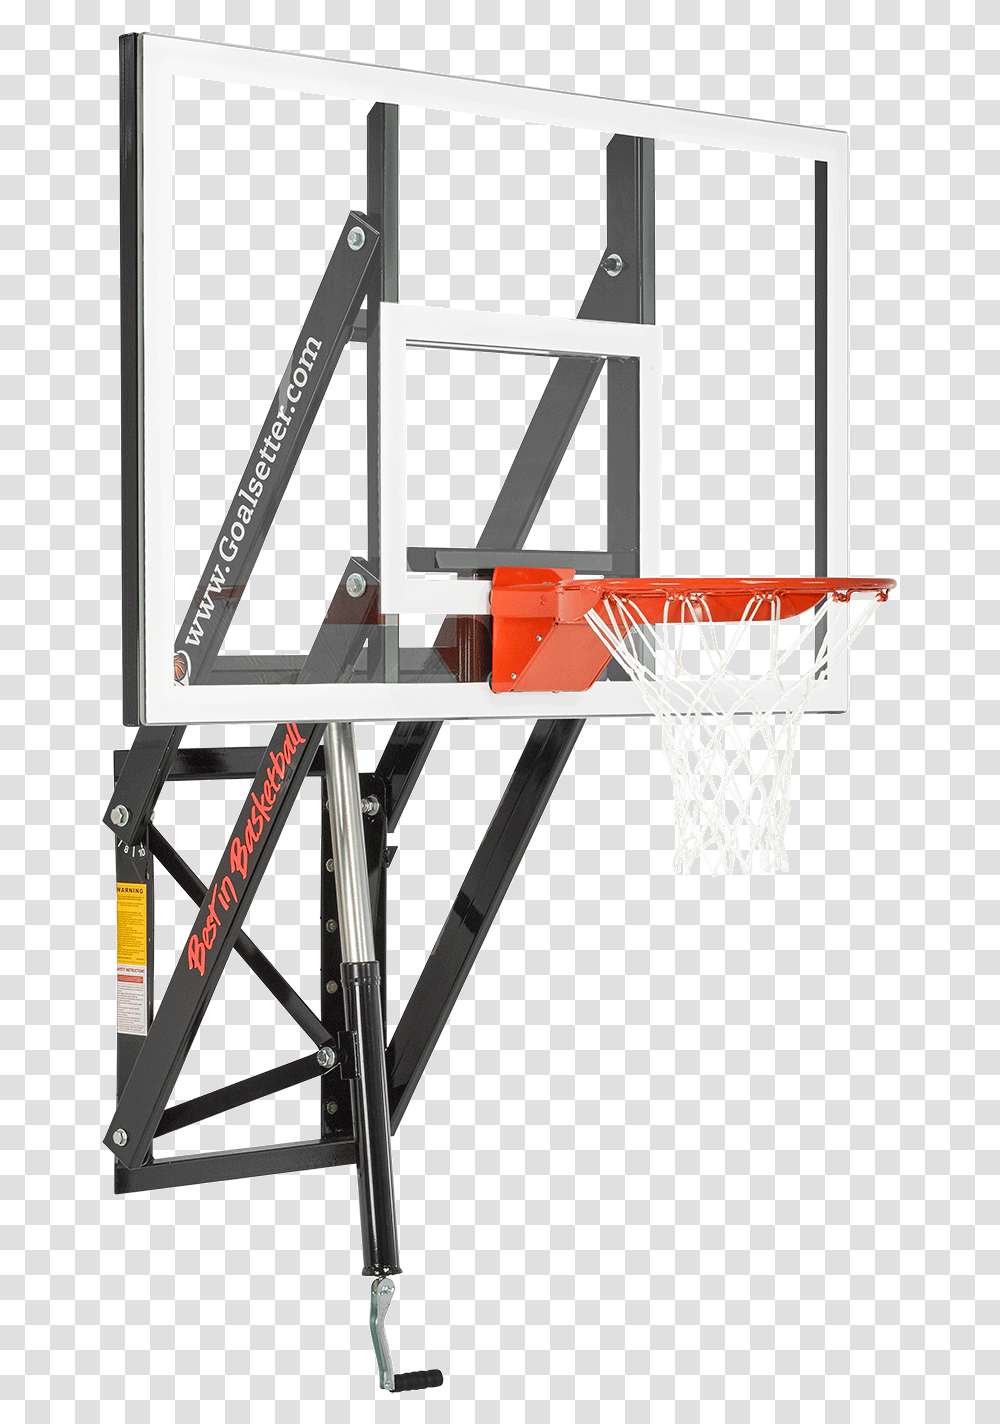 Allows You To Mount The Basketball Wall Mounted Basketball Hoops Transparent Png